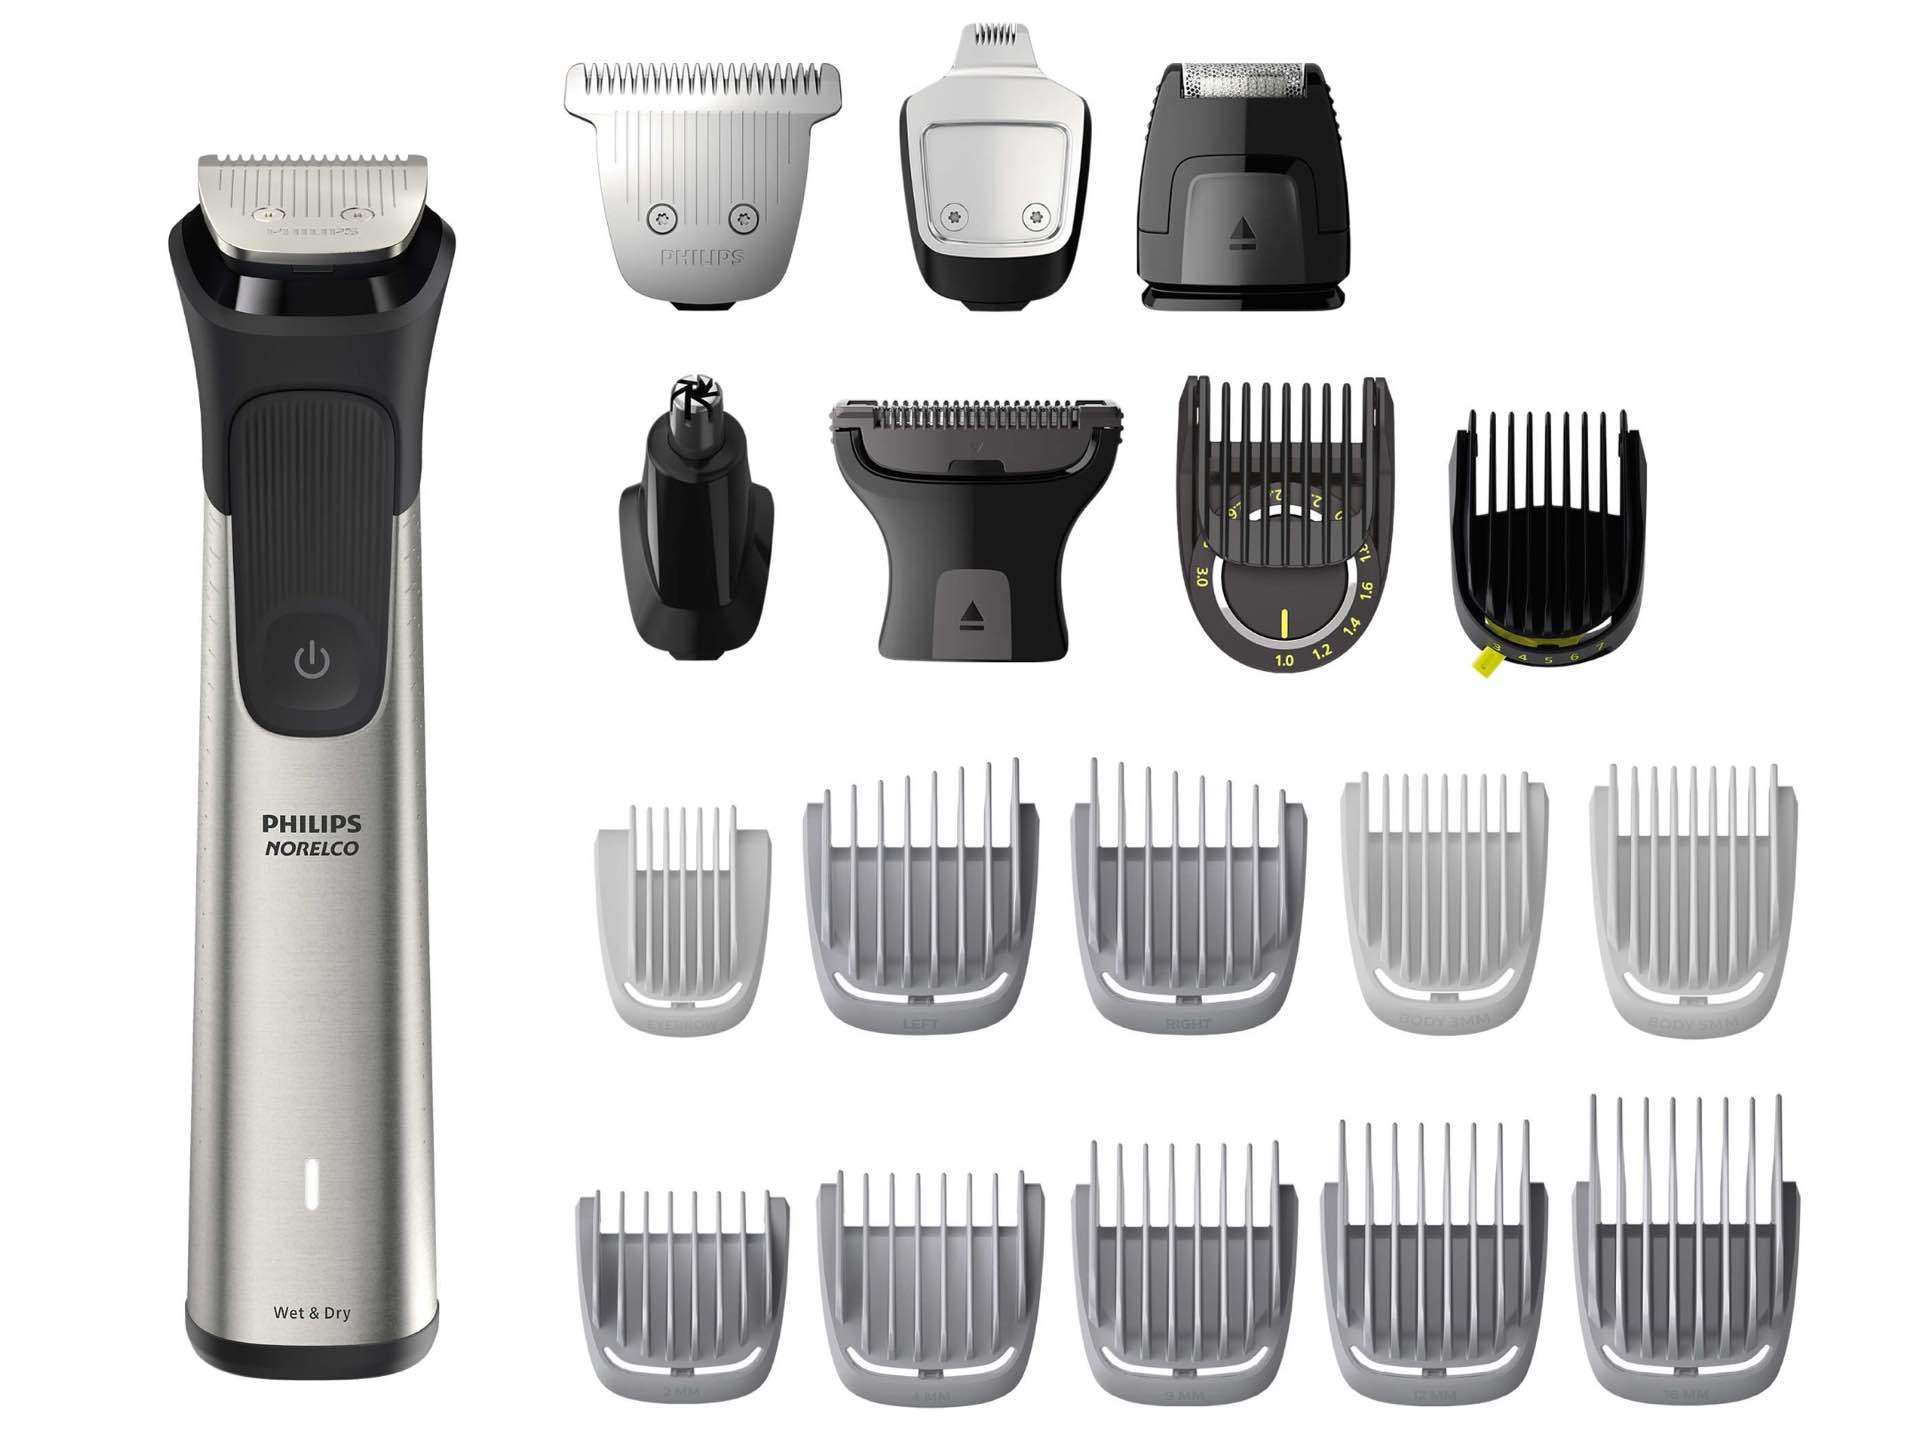 philips-norelco-multigroom-9000-mens-all-in-one-trimmer